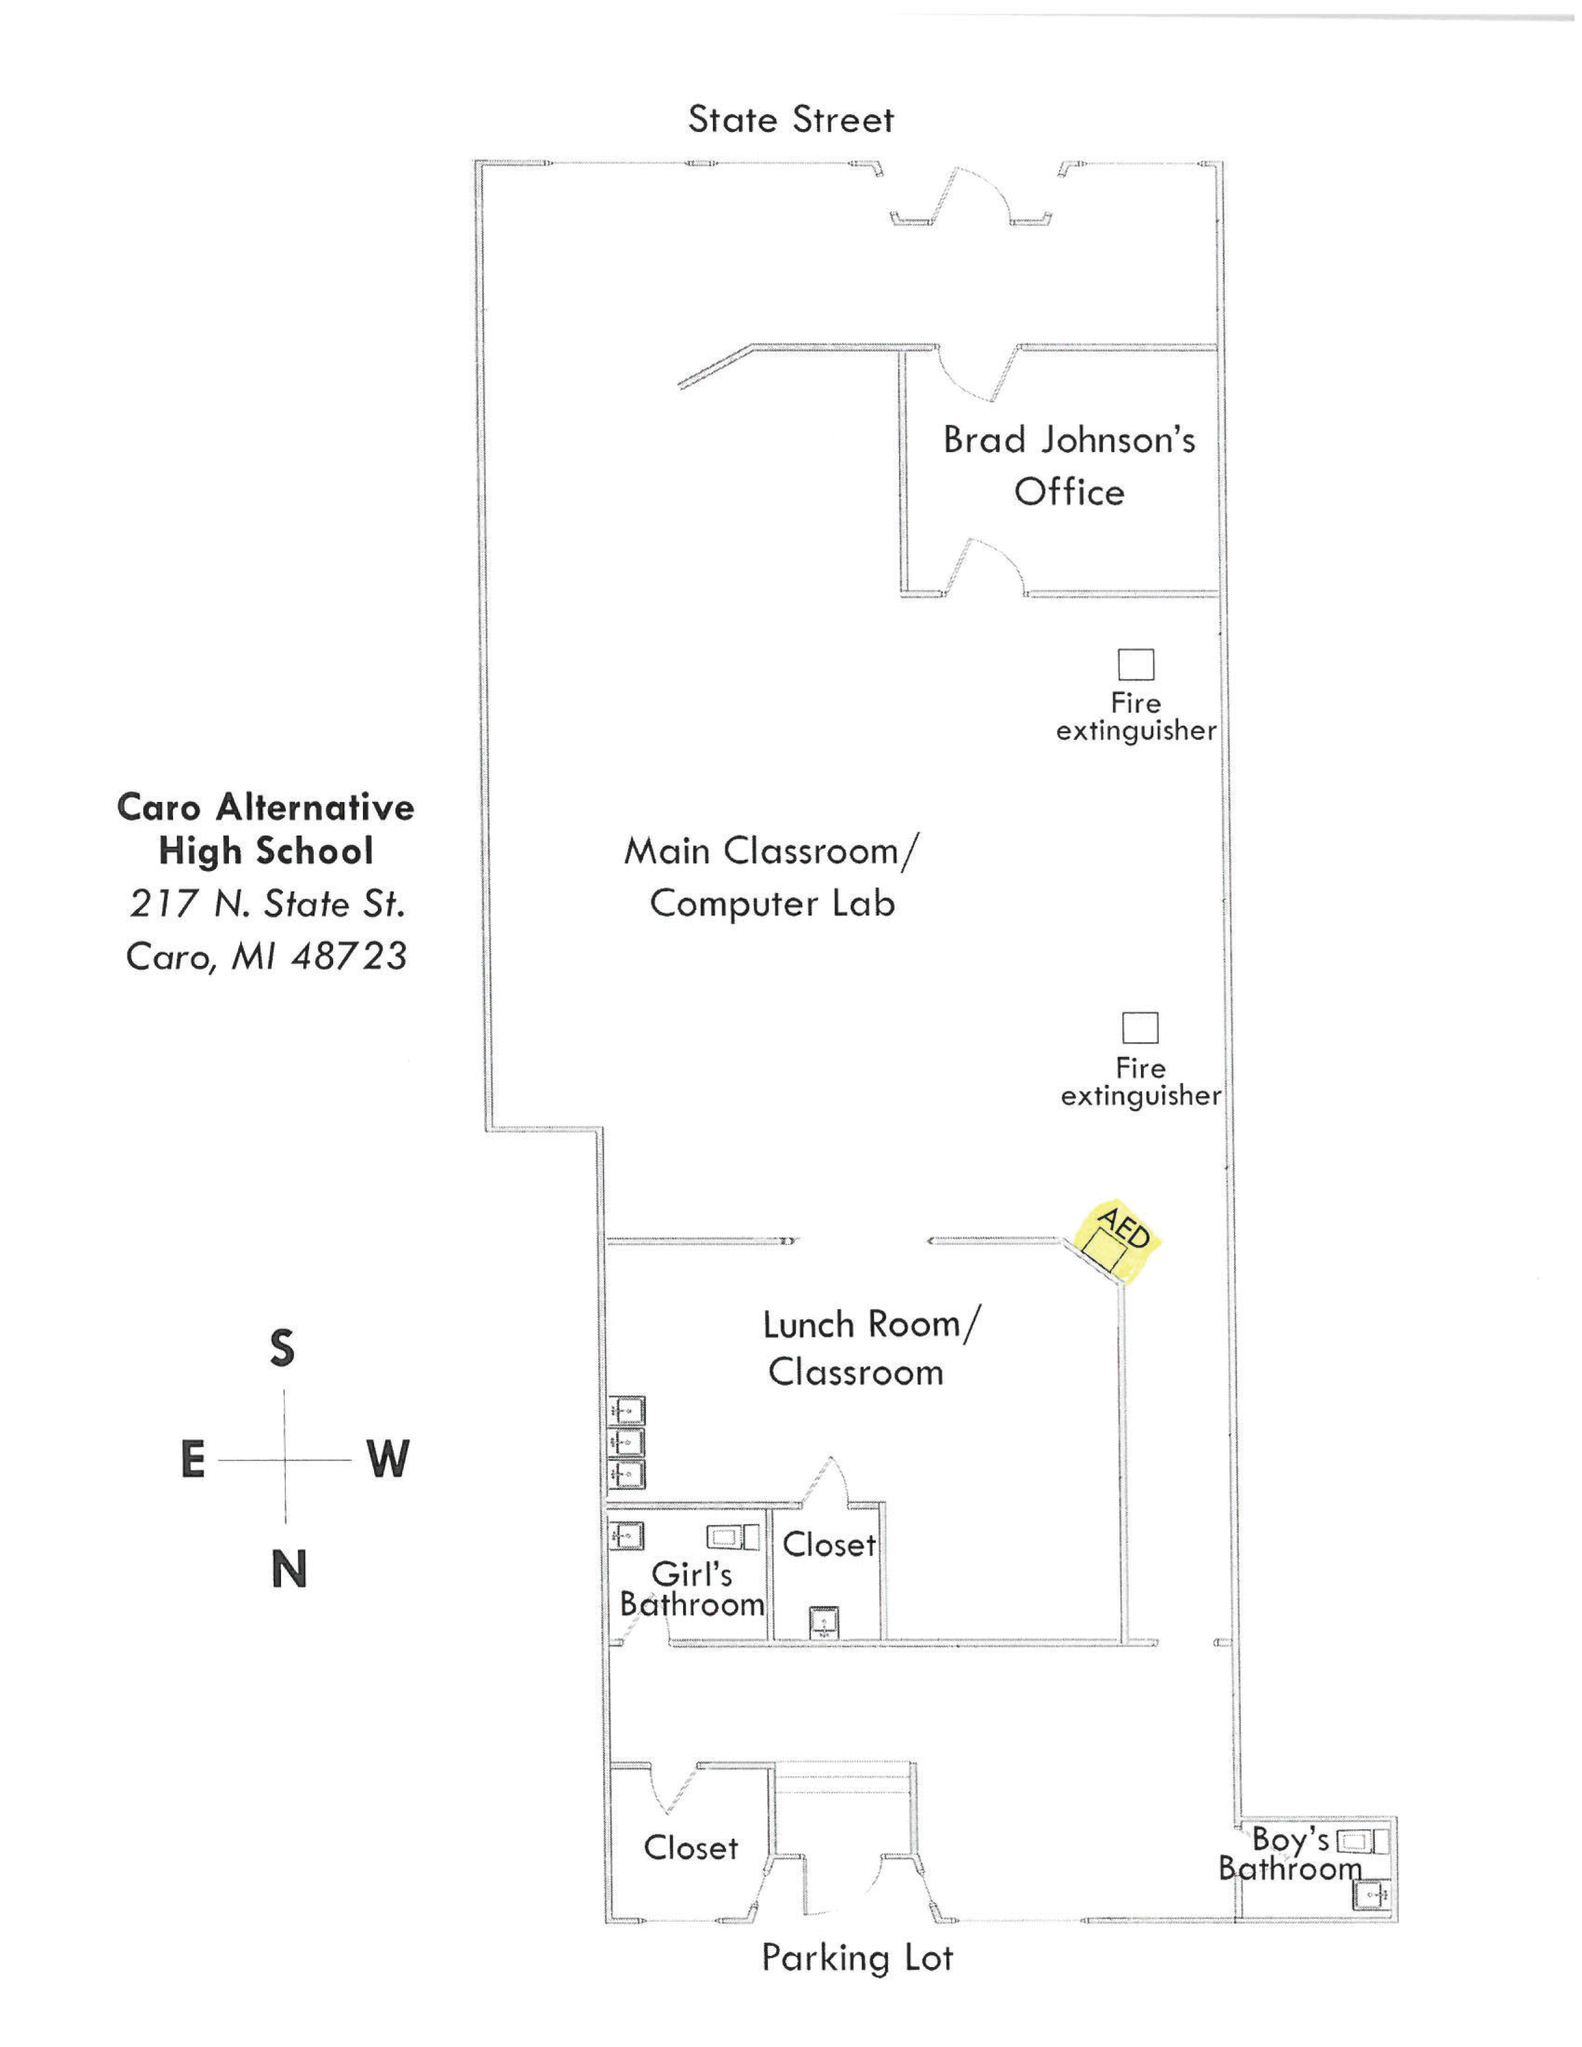 CAHS building map